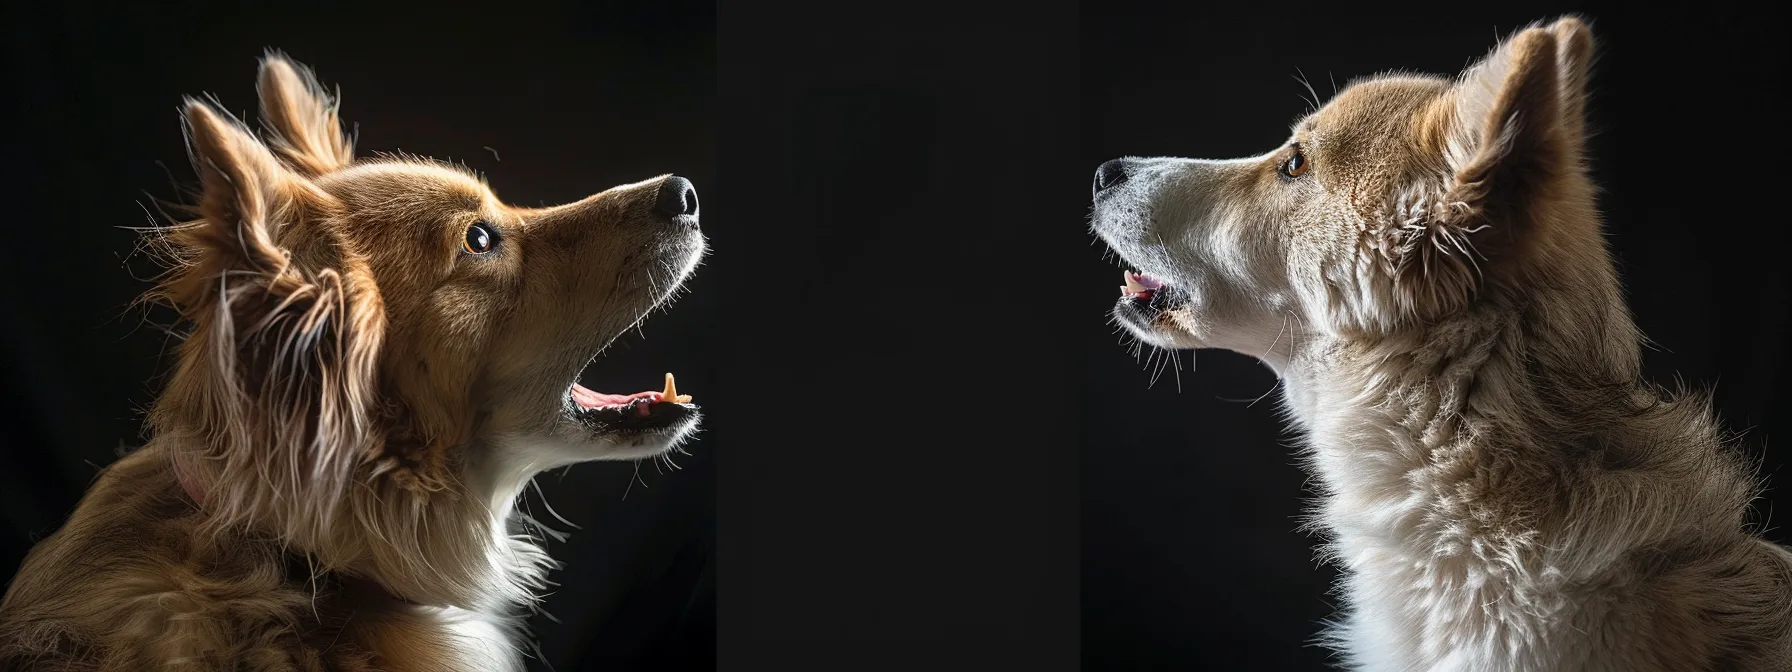 a dog trainer observes a dog's reaction to different voice tones during personalized training.